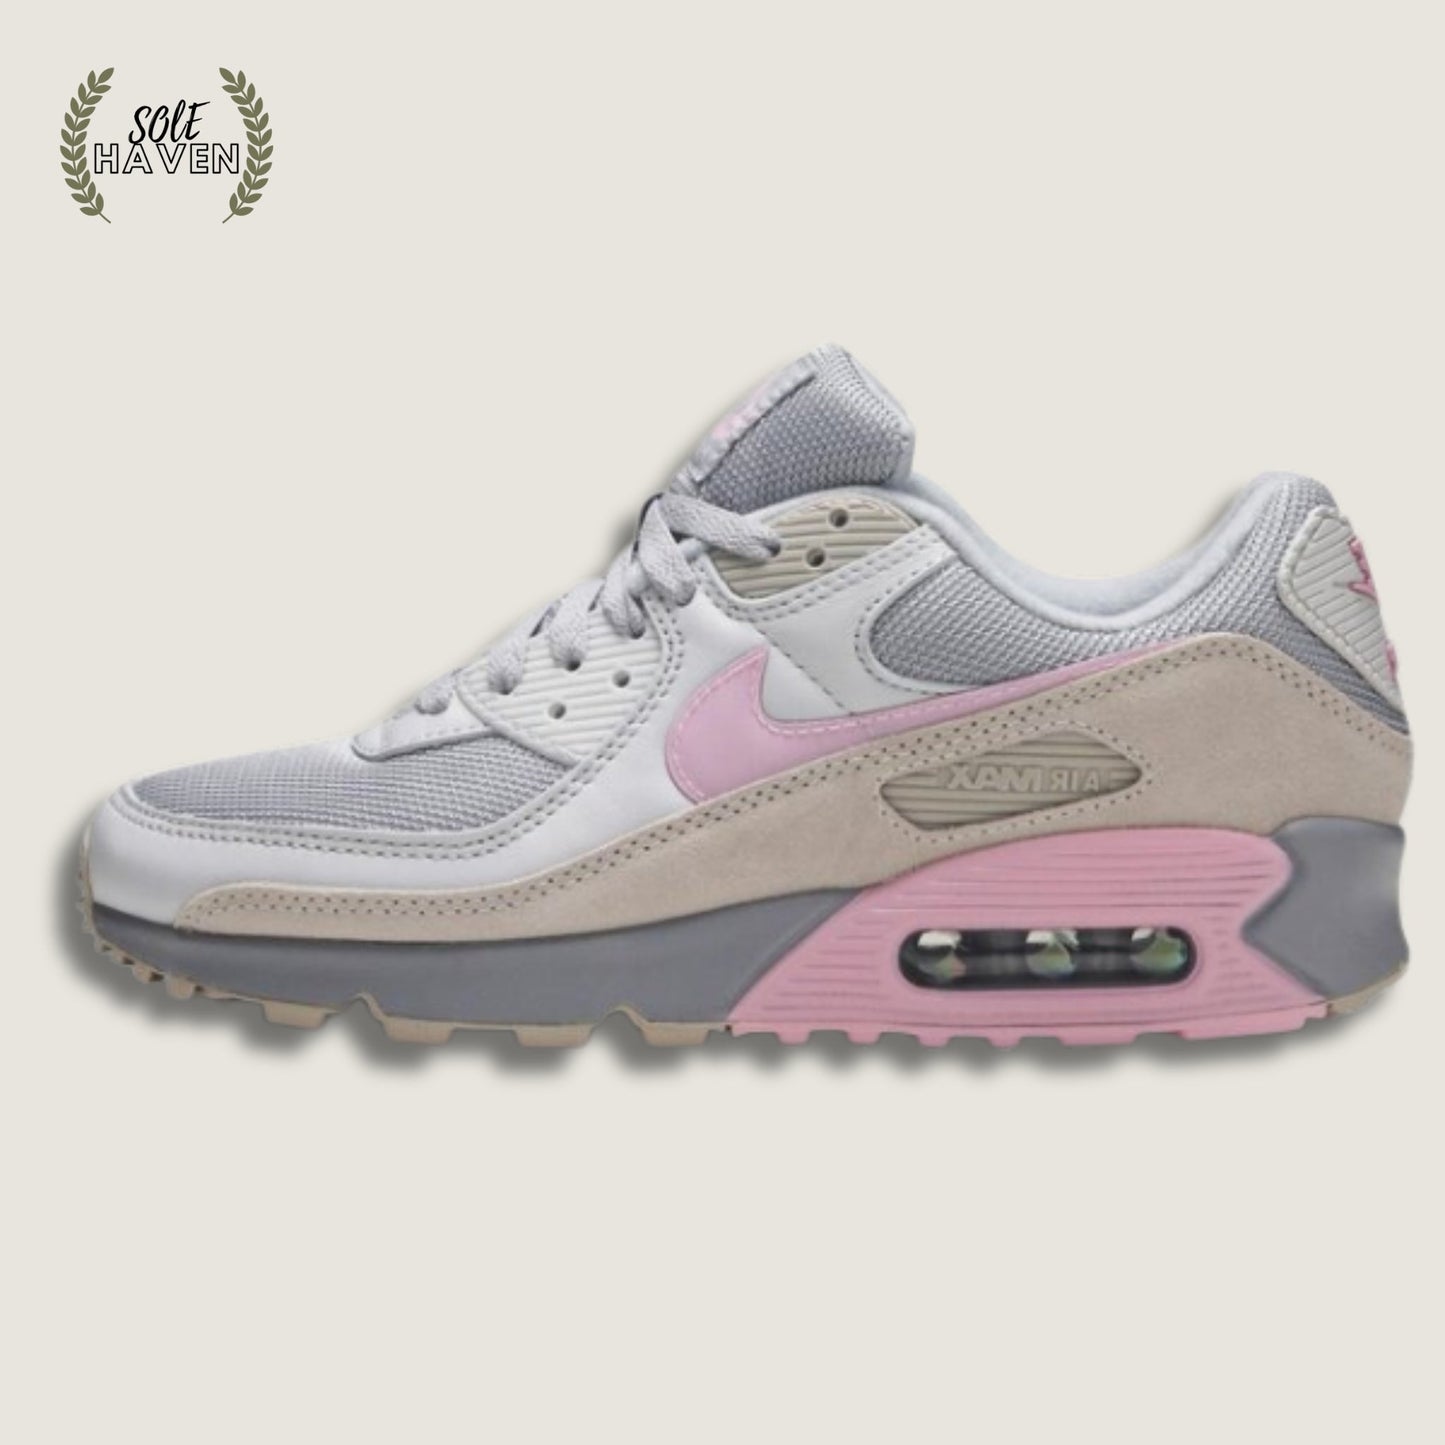 Air Max 90 'Pink String' - Sole HavenShoesNike